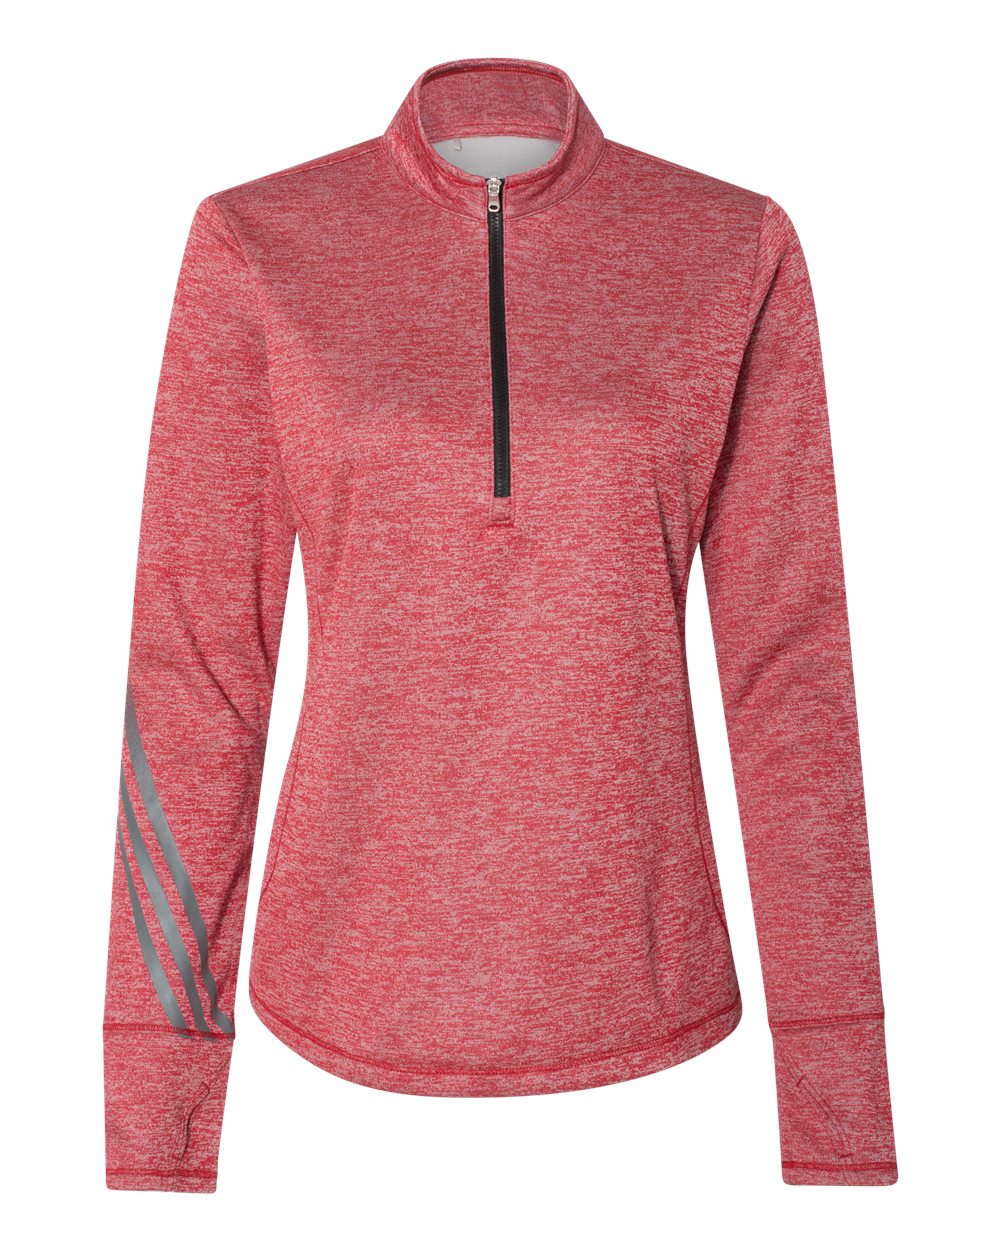 Adidas - Women's Brushed Terry Heathered Quarter-Zip Pullover - A285